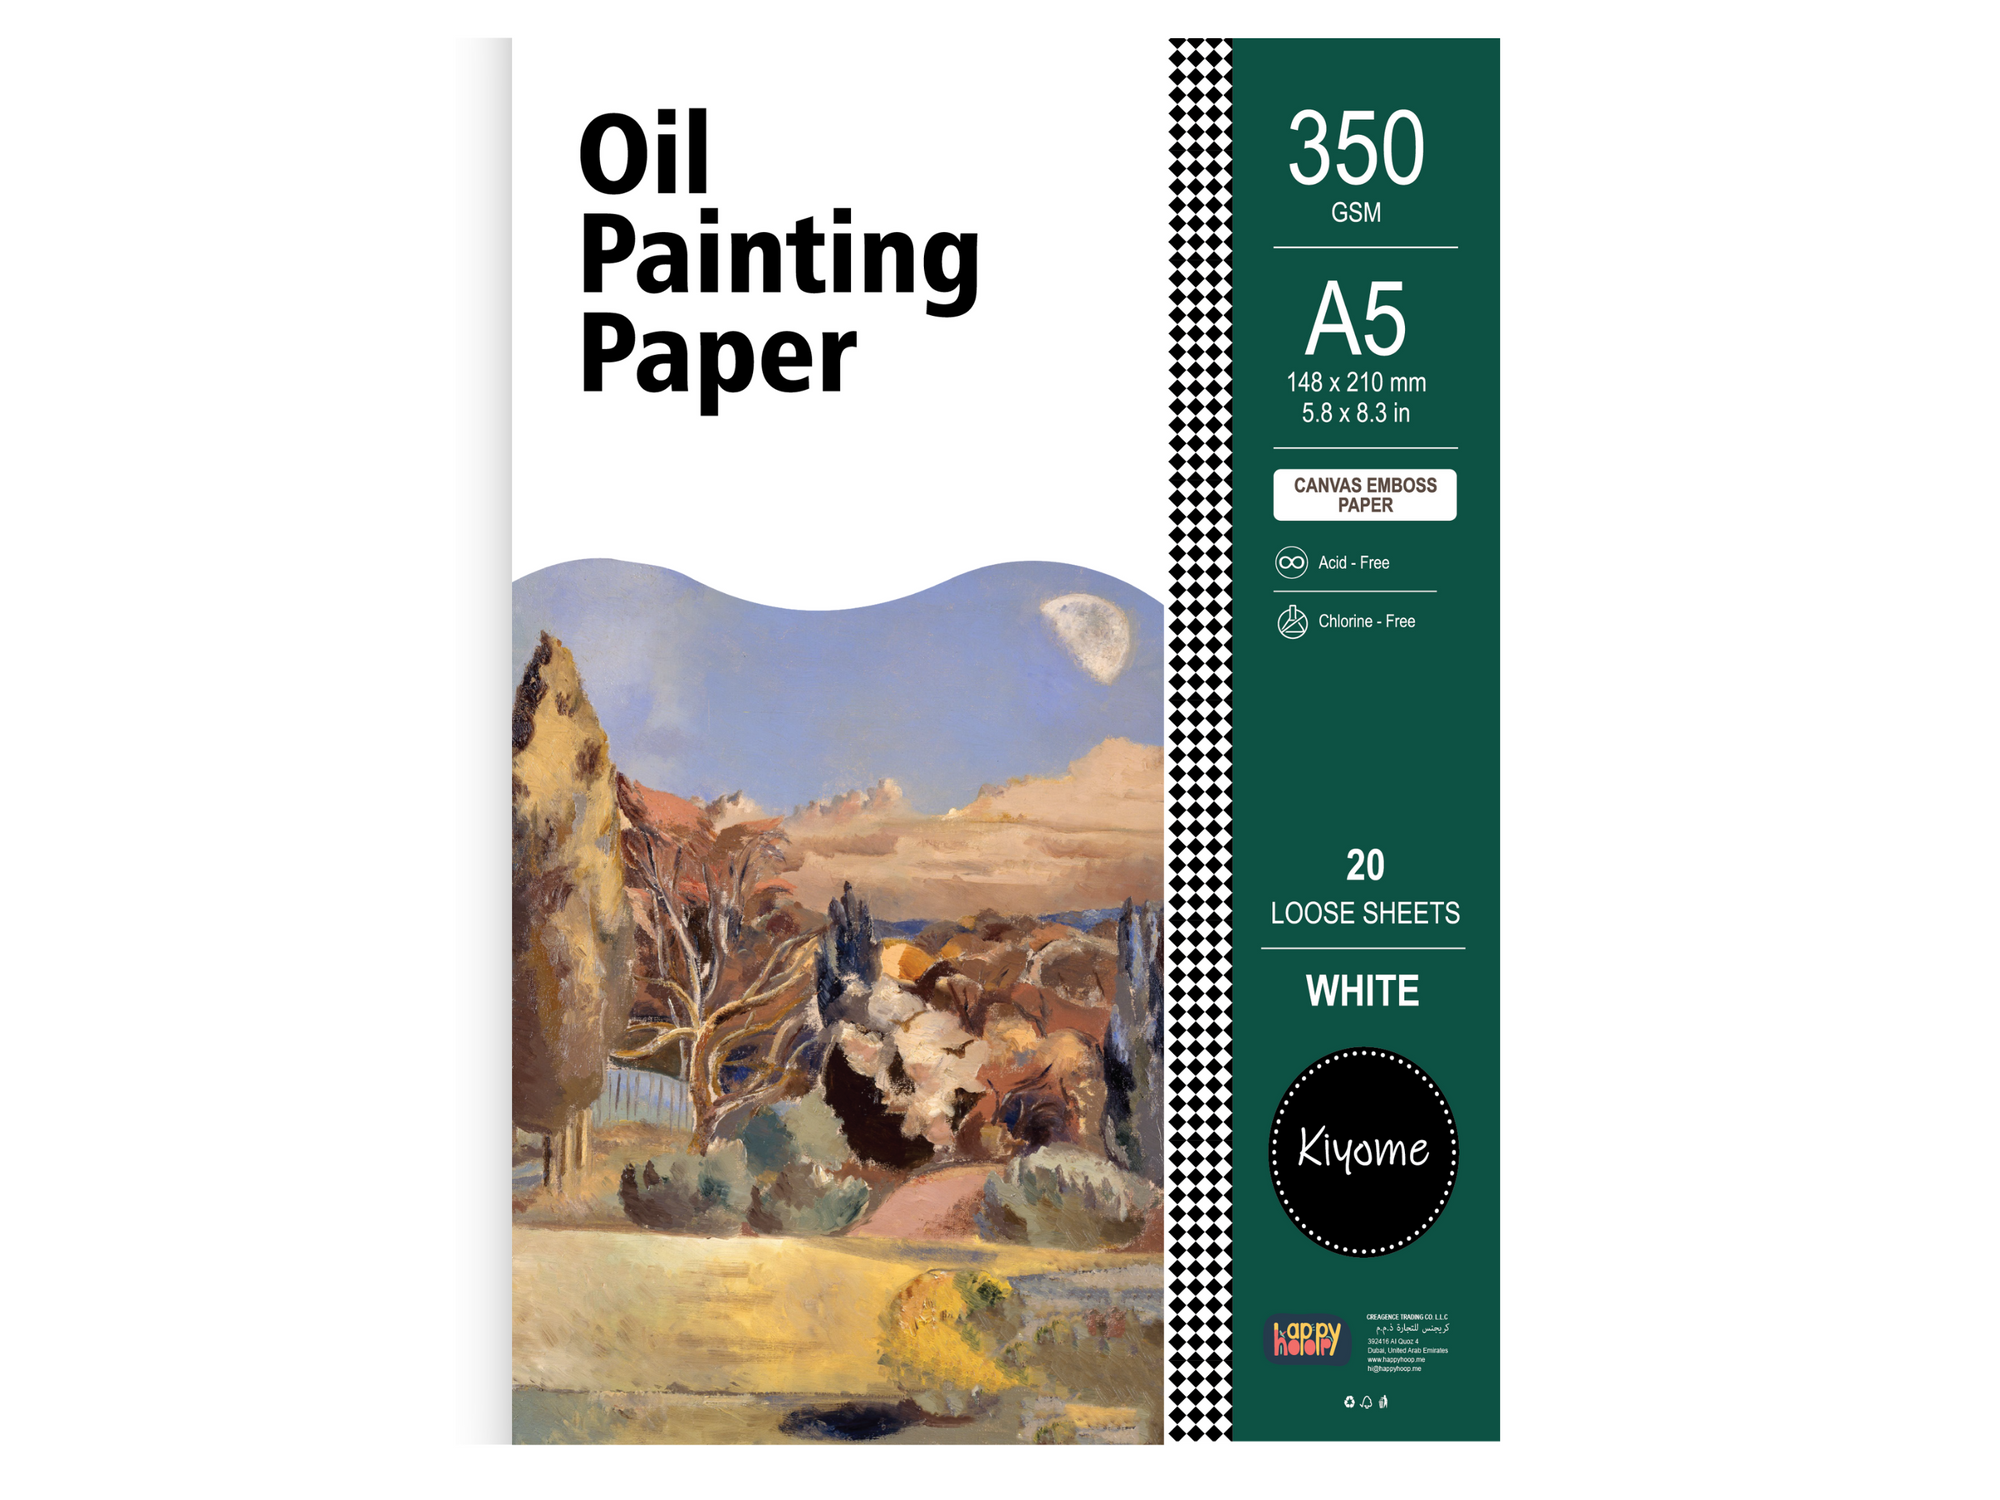 Kiyome Oil Painting Sheets | 350 GSM | A4 | 10 Sheets